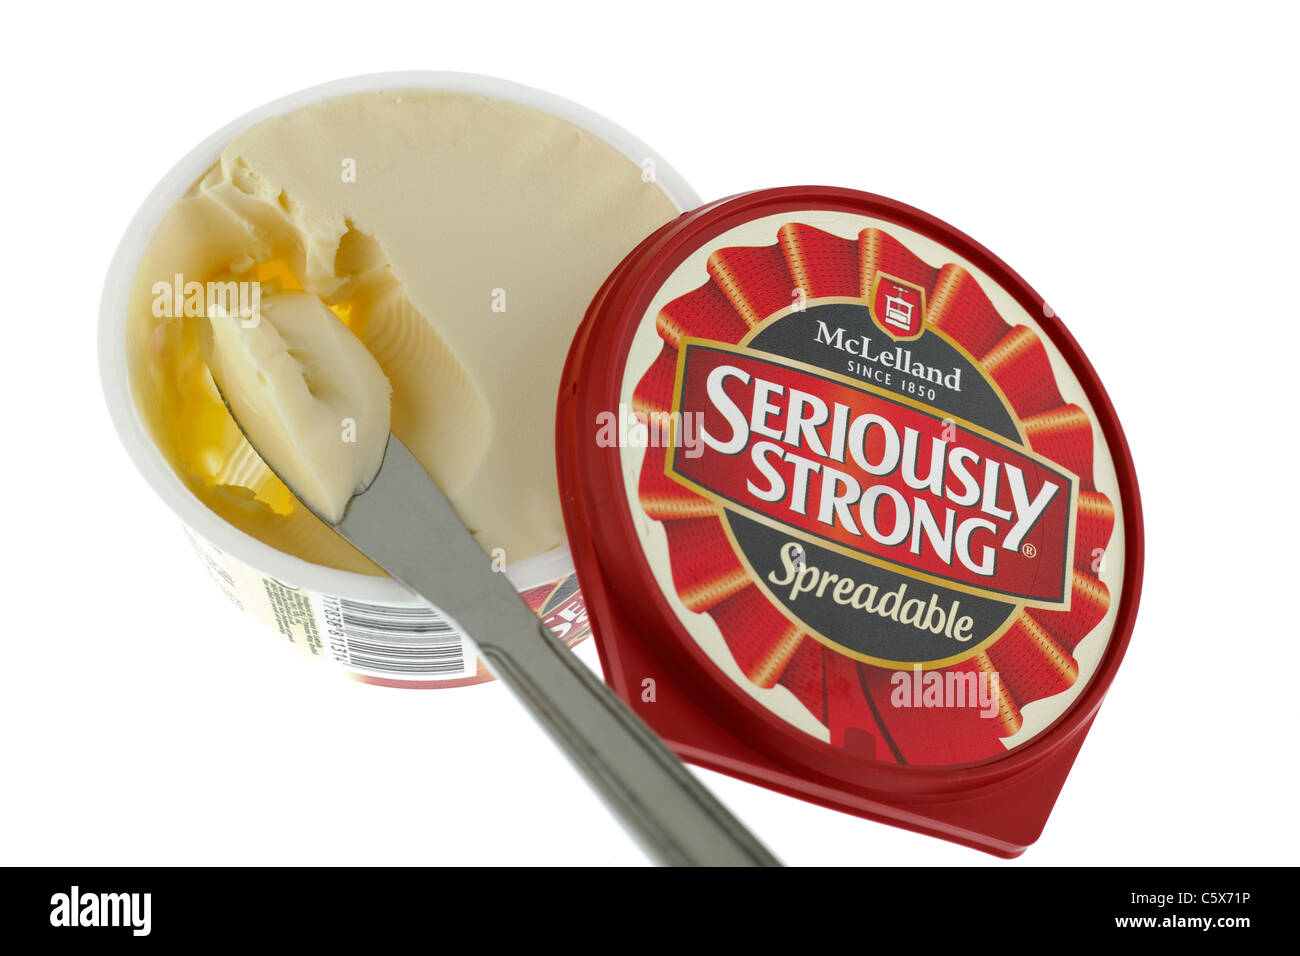 Tub of Spreadable Seriously Strong Mcelland cheese spread and a portion on a knife. Stock Photo